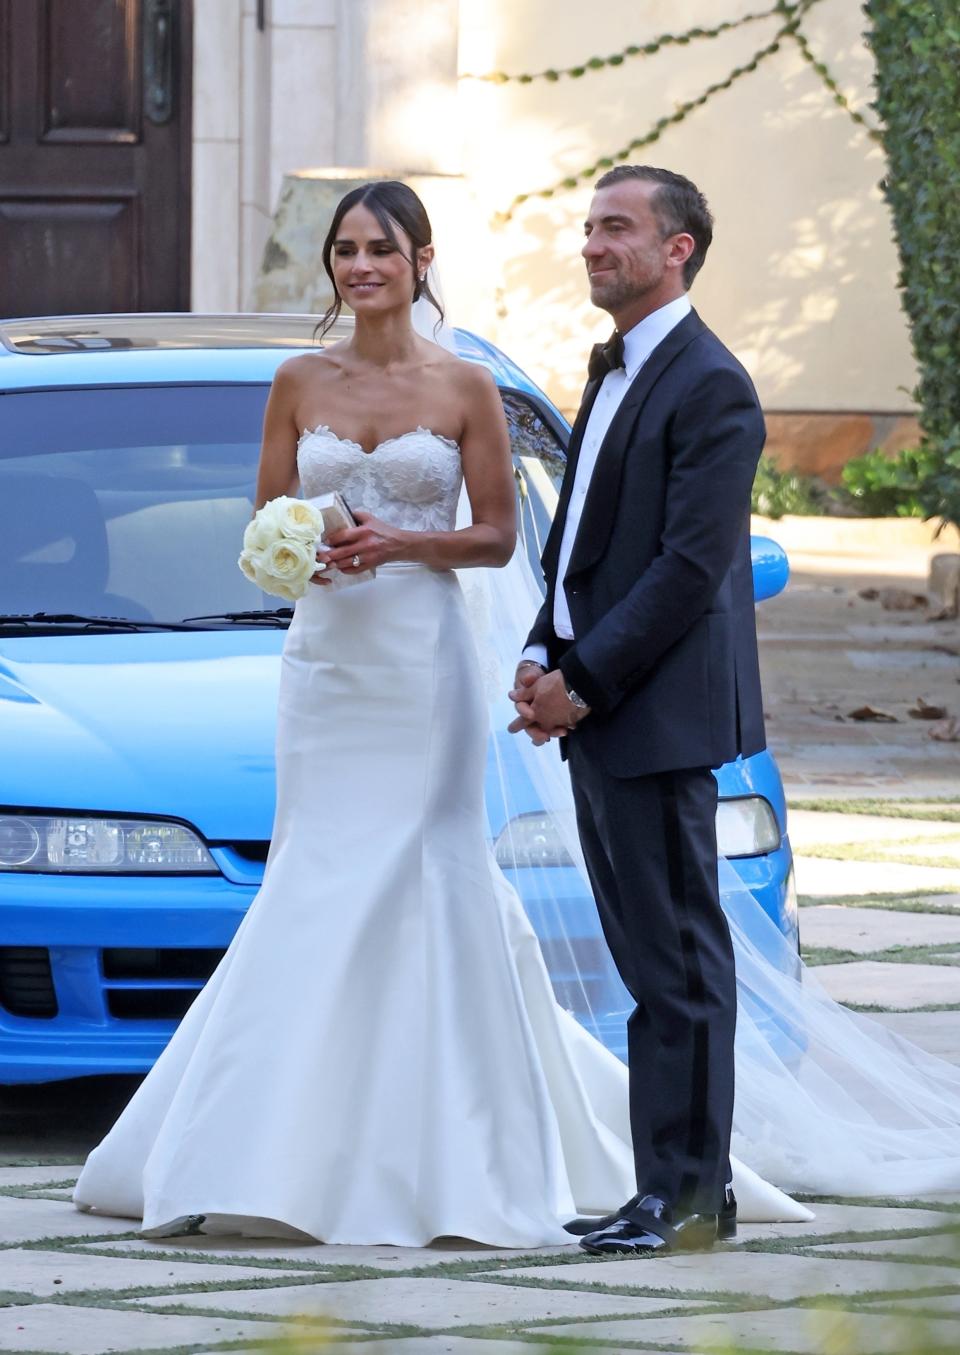 *PREMIUM-EXCLUSIVE* Jordana Brewster and Mason Morfit tie the knot in Santa Barbara in front of F&F co-stars, family and friends! (GGRE, CLTN / CB/CB / BACKGRID)